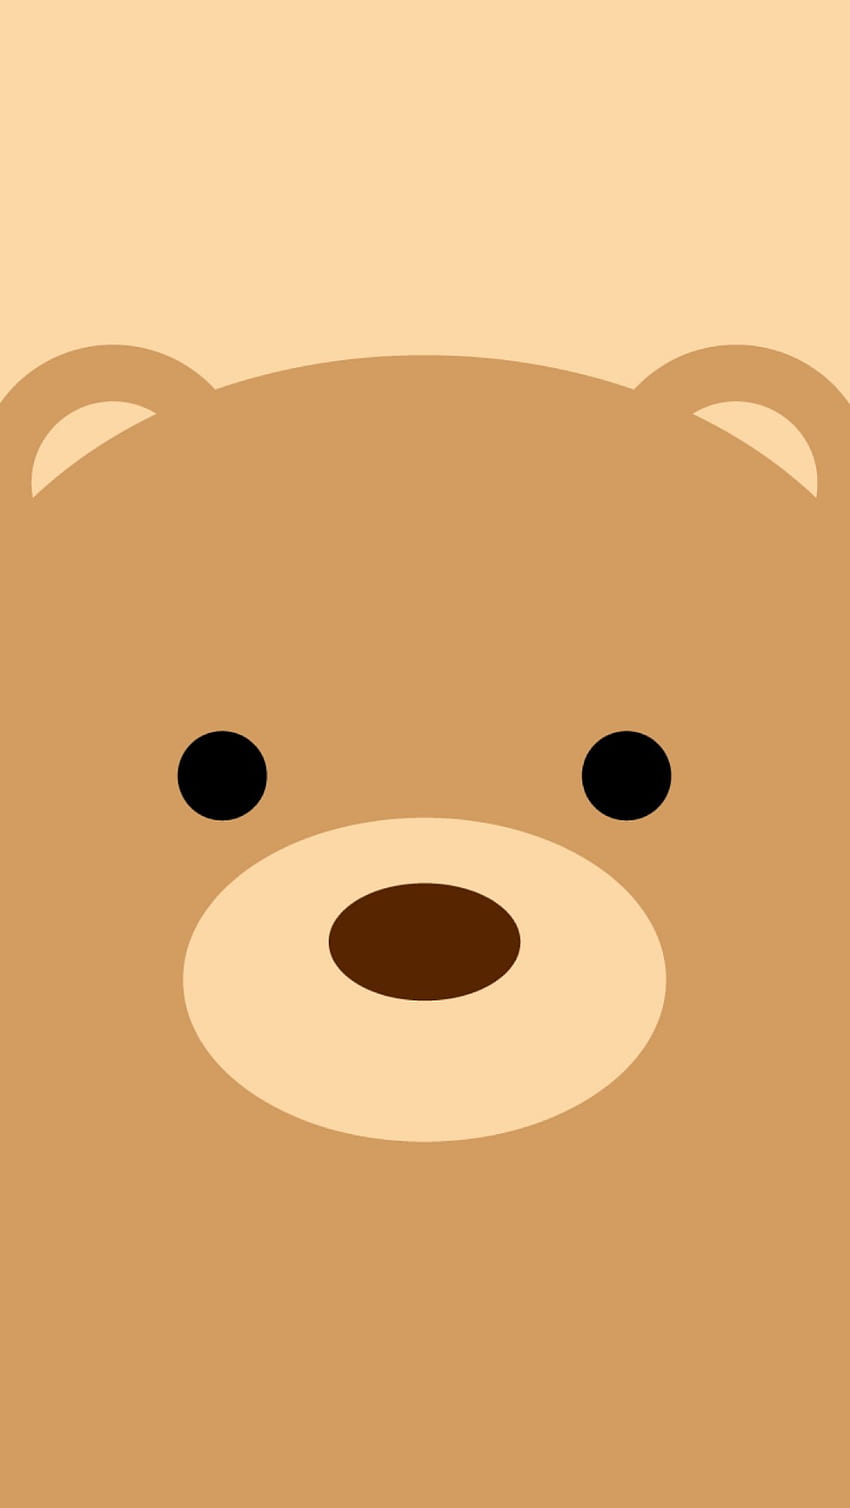 A brown bear is looking at the camera - Teddy bear